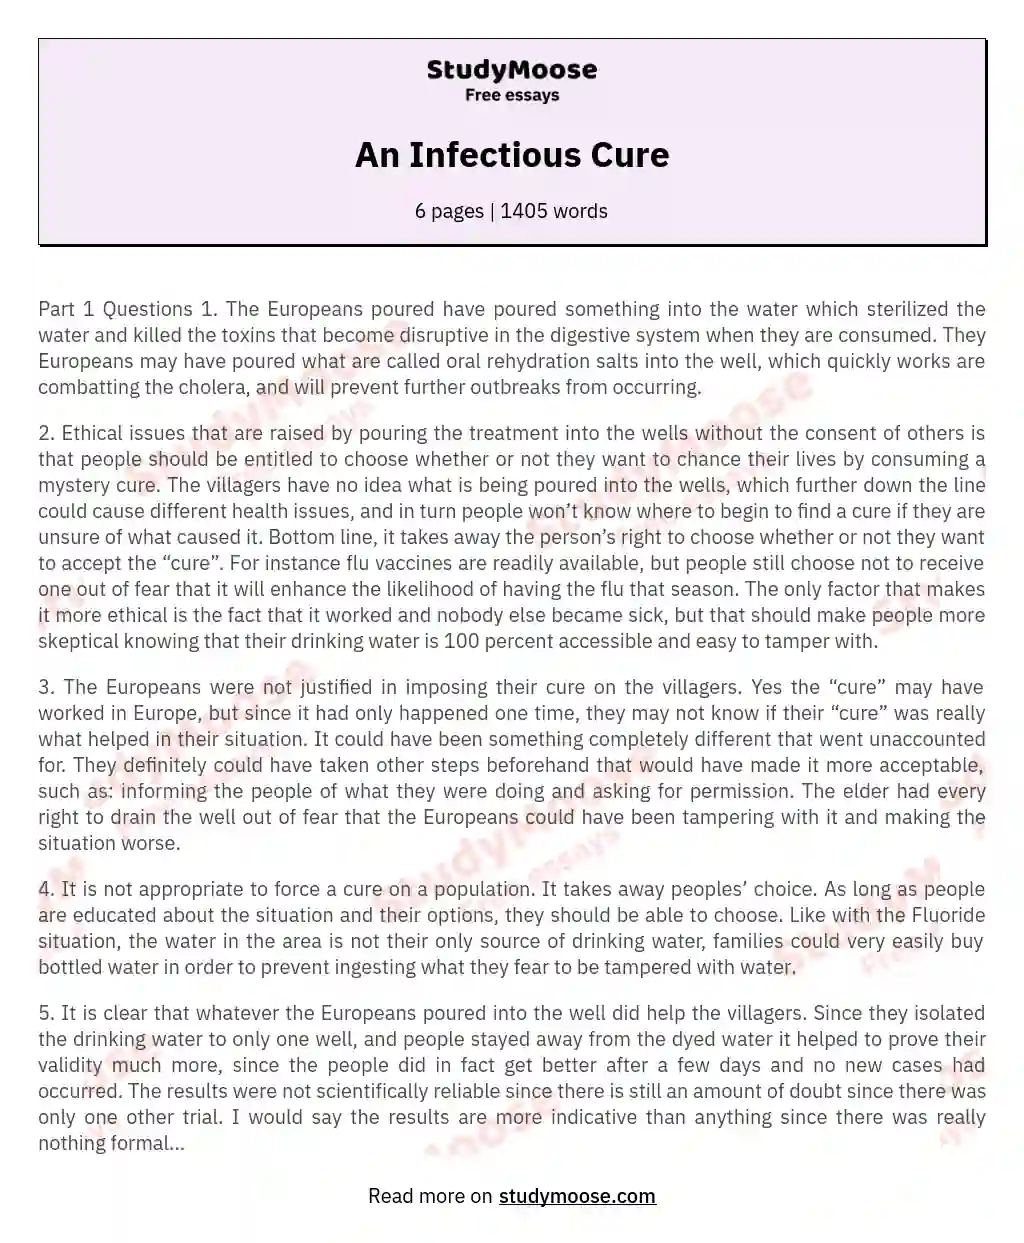 An Infectious Cure essay